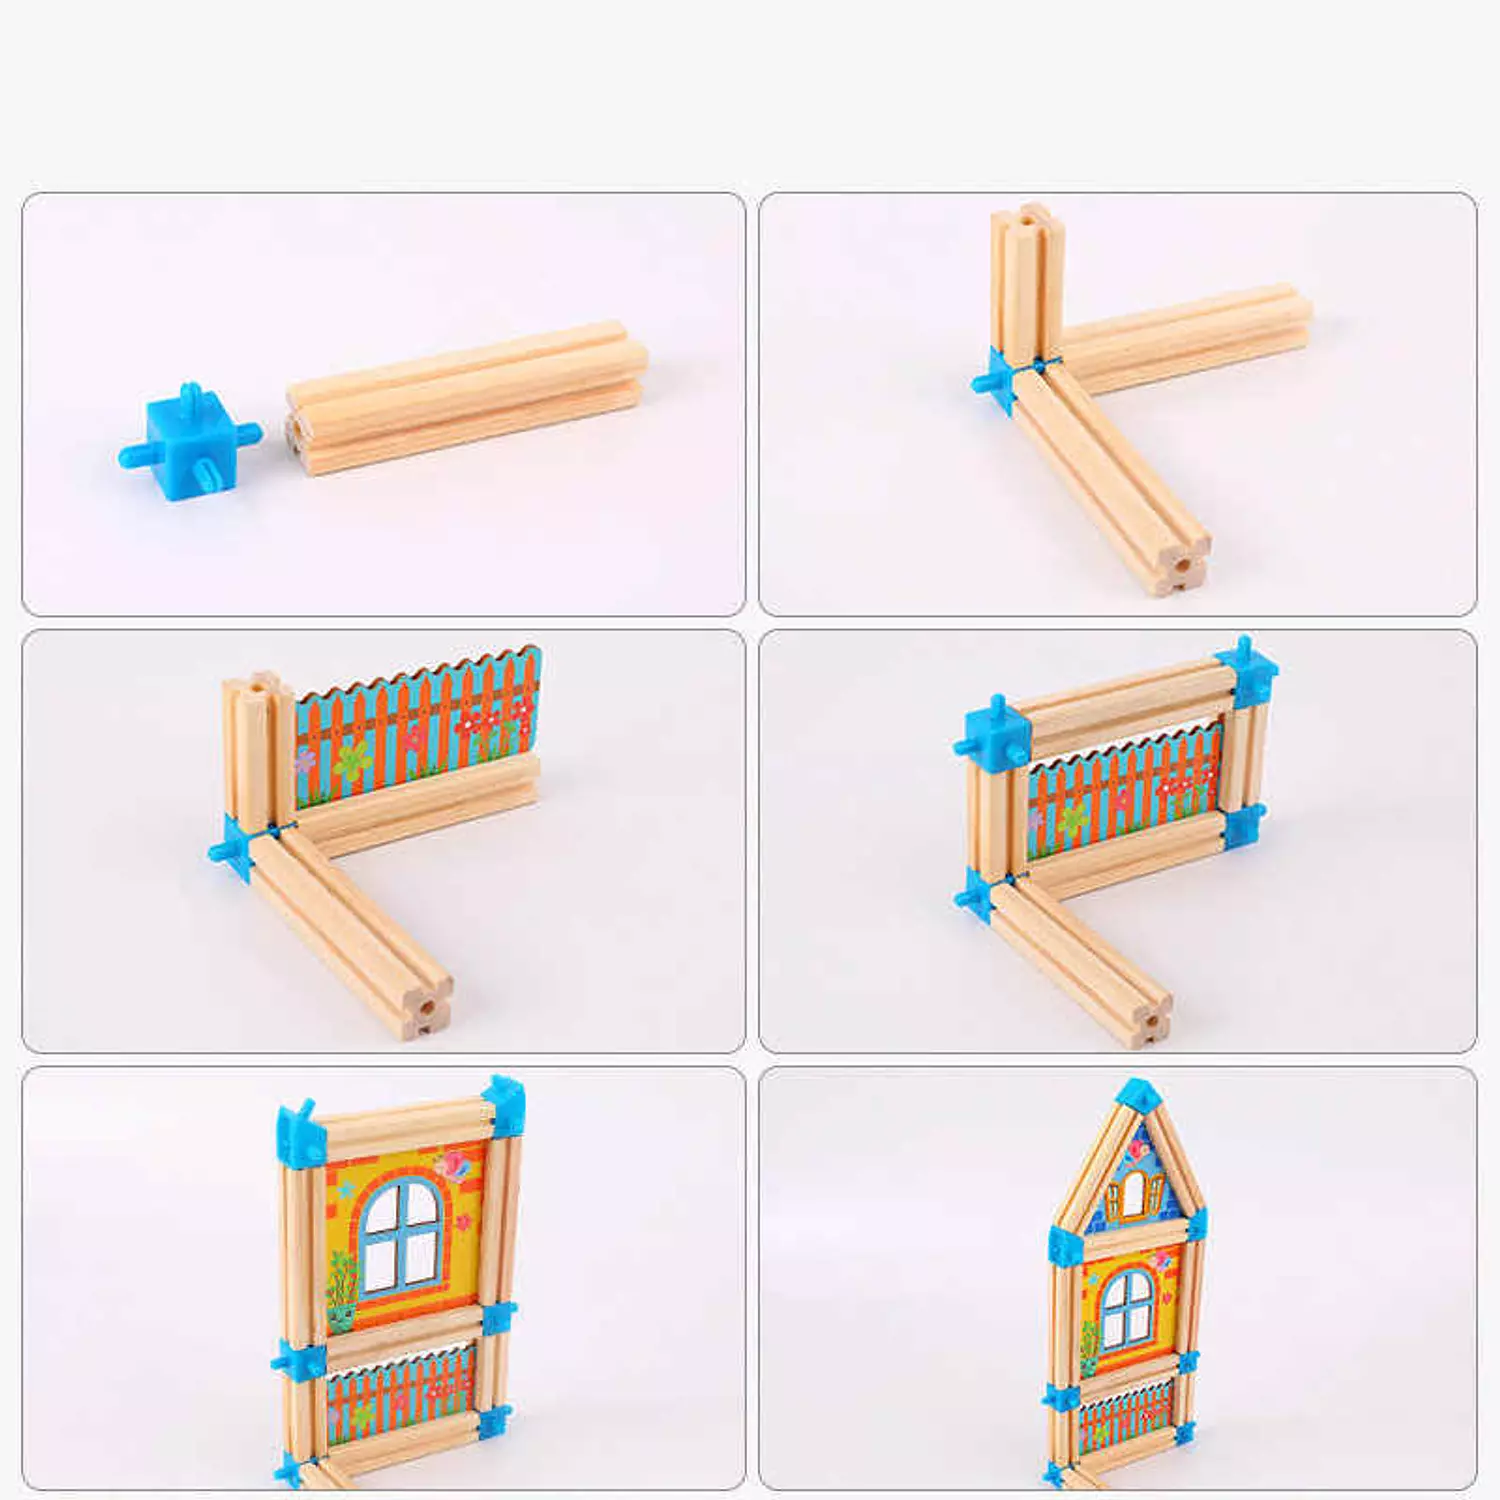 Master of Architecture Building Blocks Toy 5